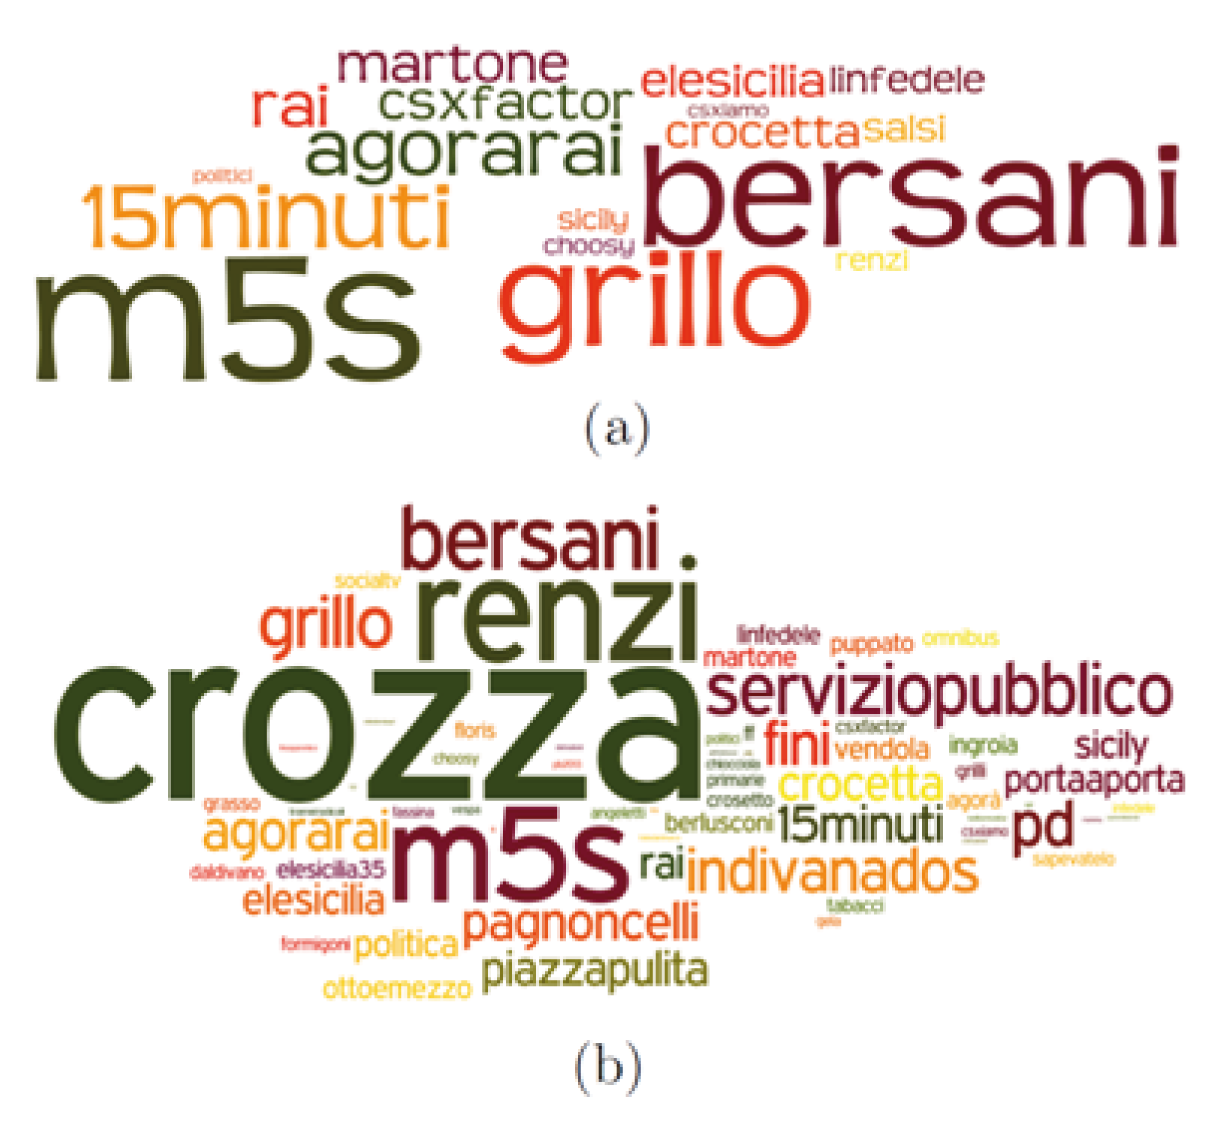 Fig. 6 - Tag cloud of the most relevant hashtags related to two particular video (a and b) published on YouTube